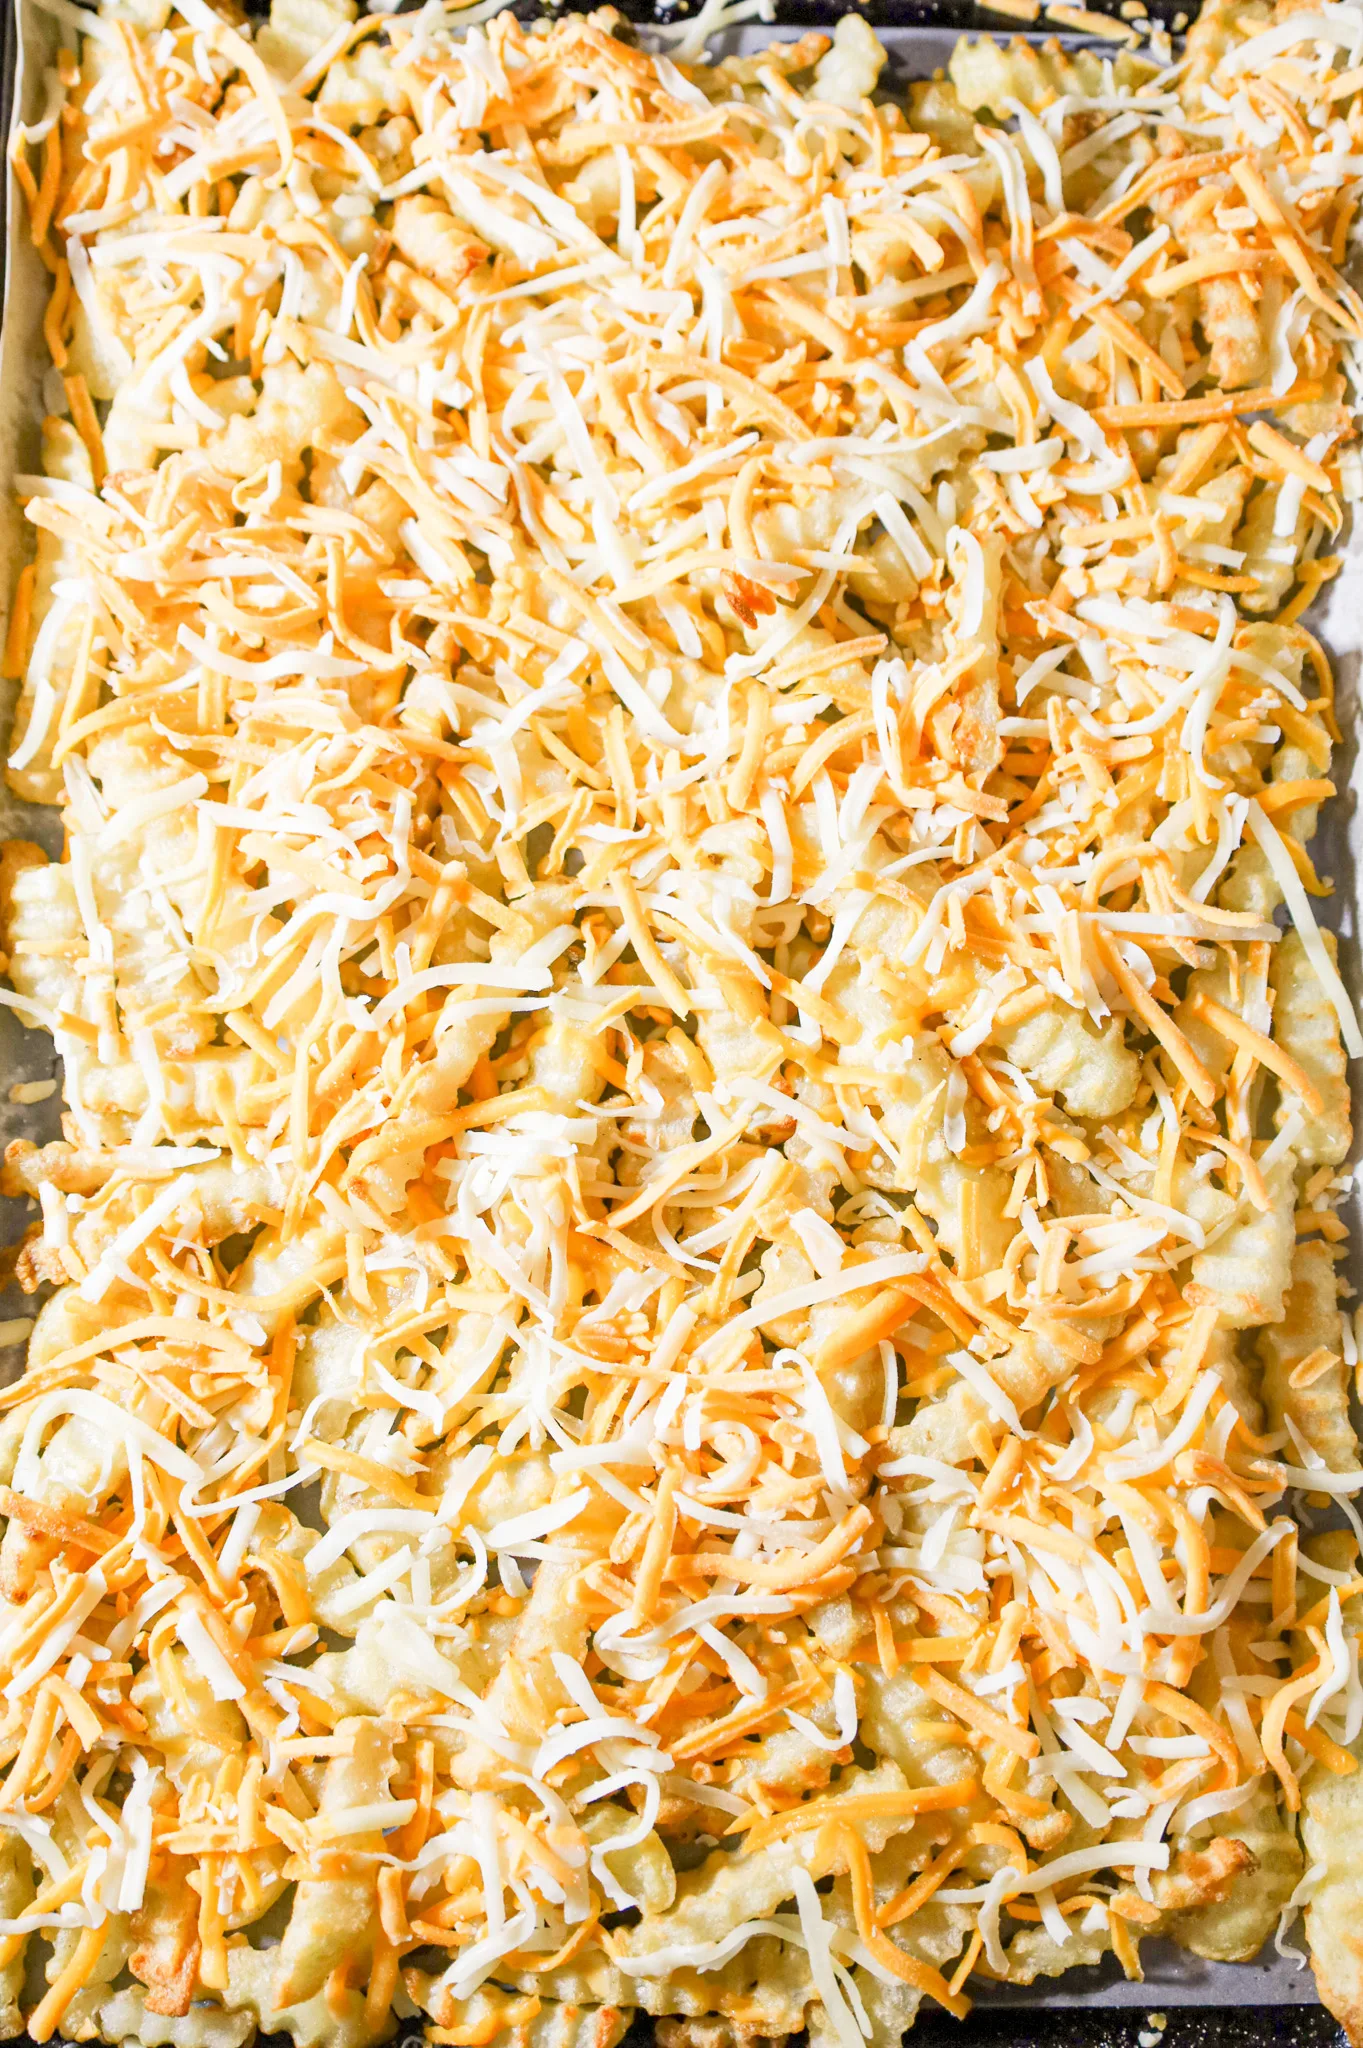 shredded cheddar and mozzarella cheese on top of crinkle cut fries on a baking sheet